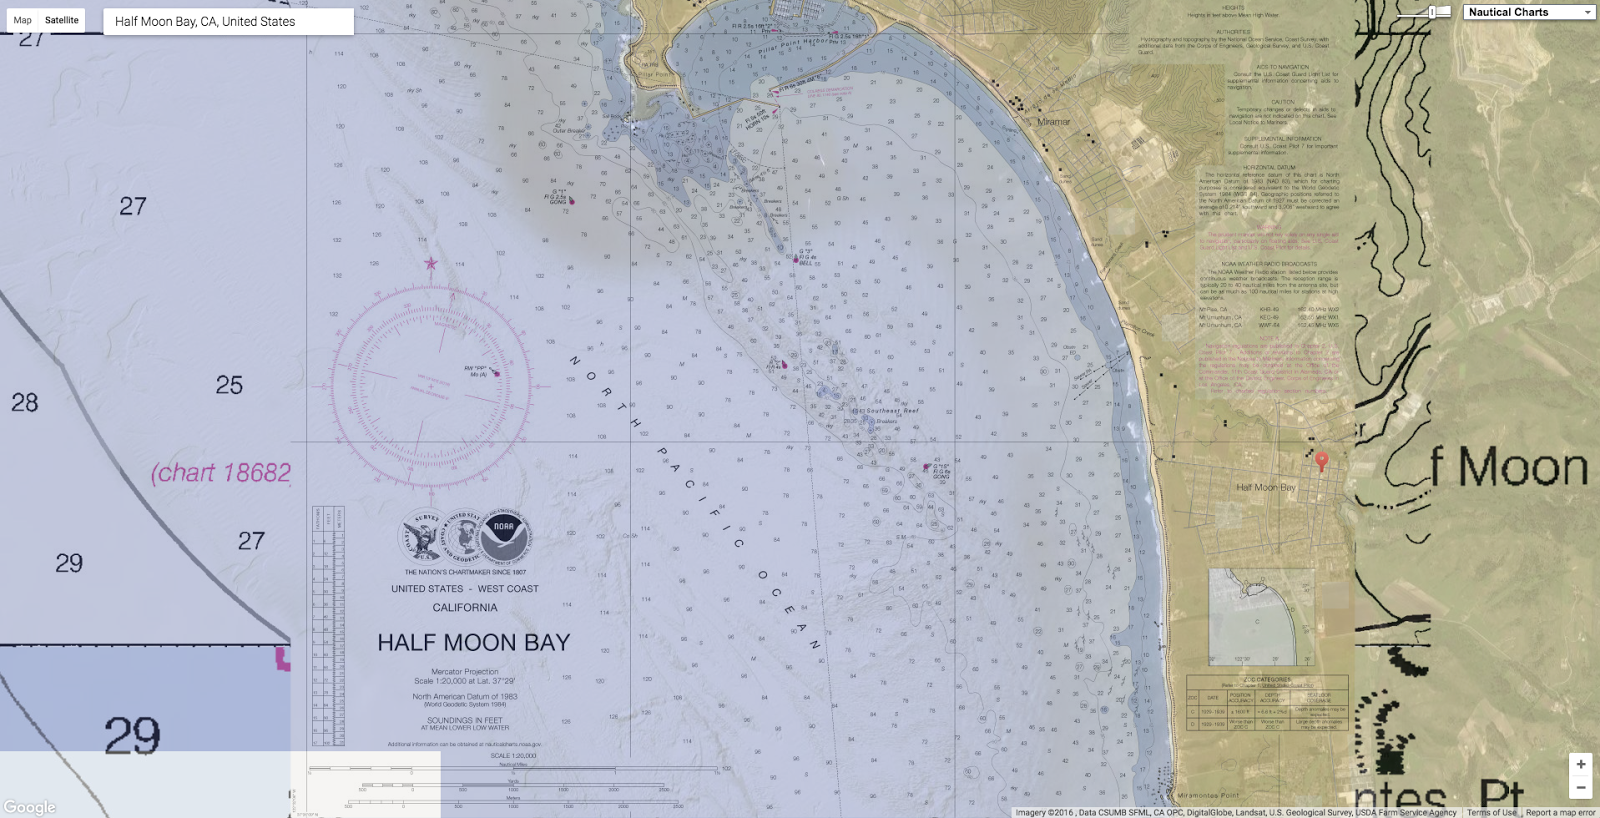 GeoGarage blog: How accurate are nautical charts?